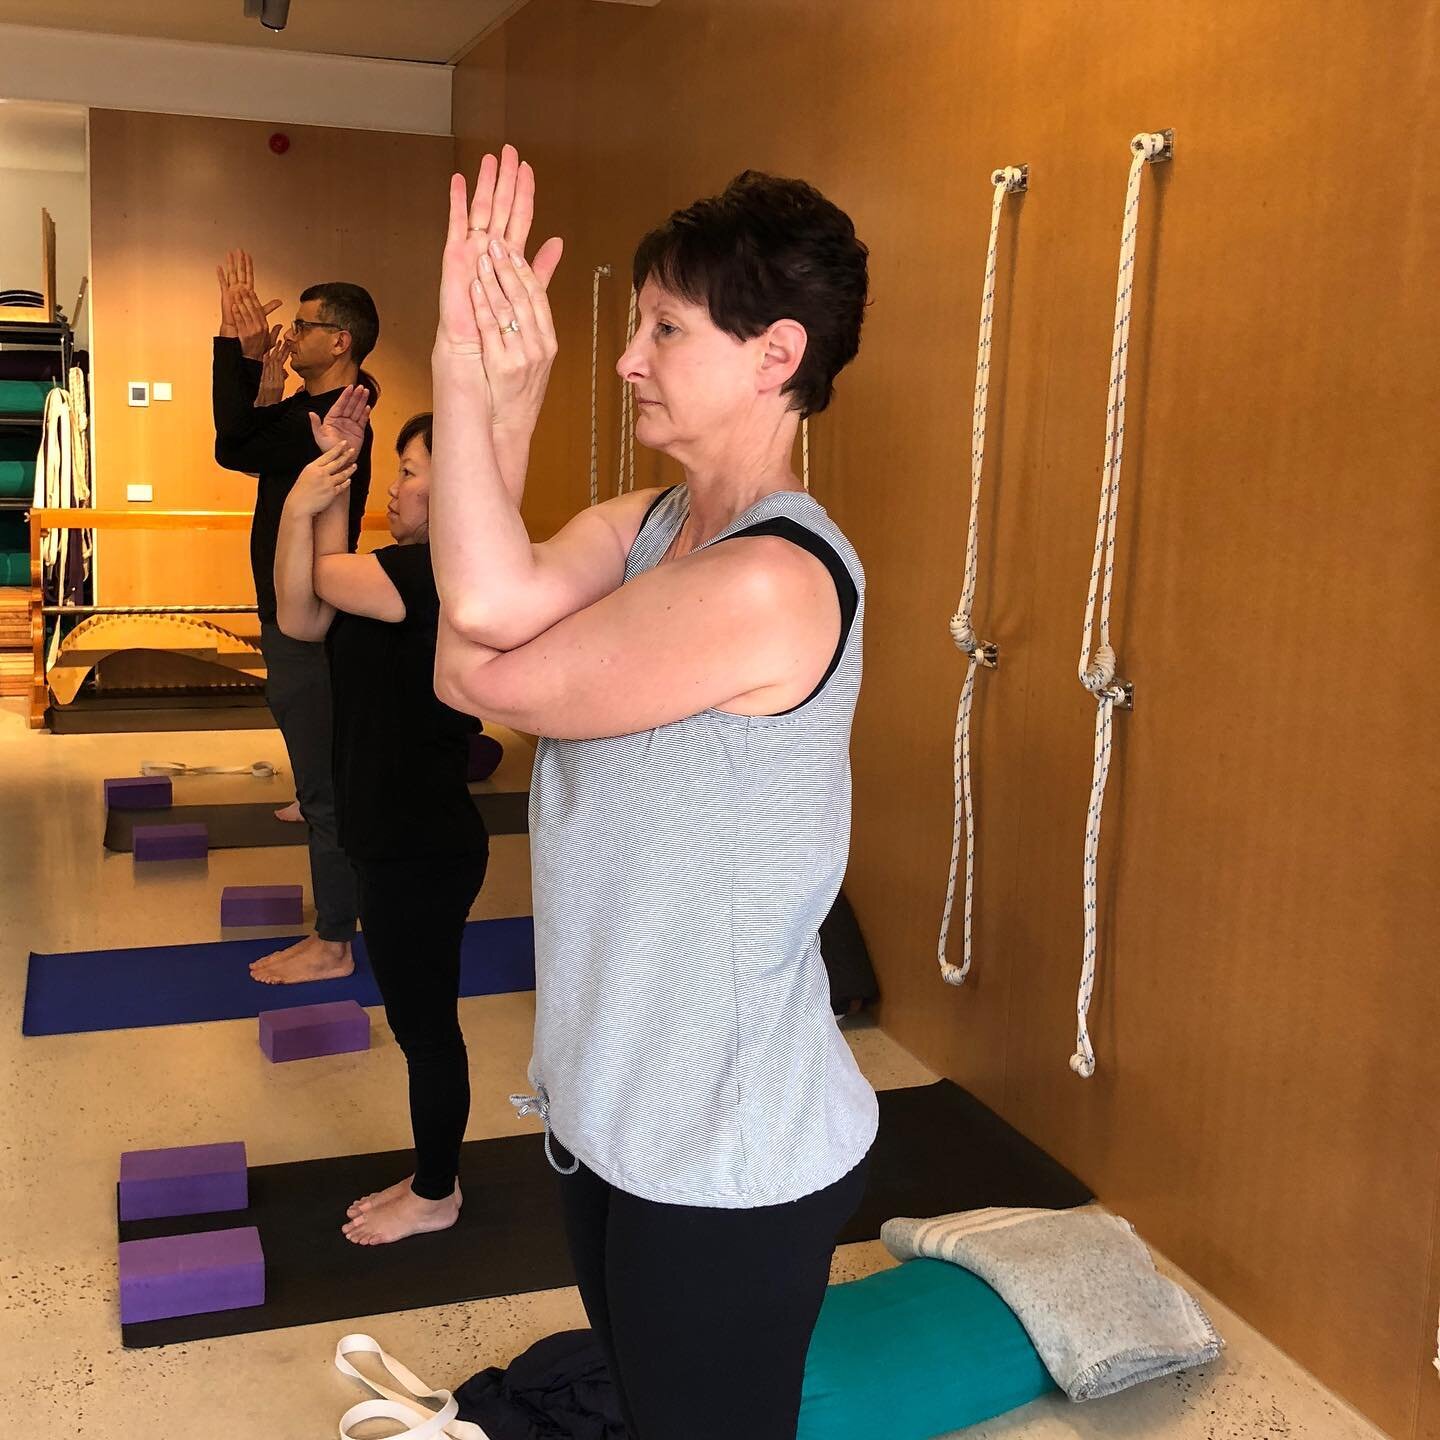 This week we have a Miscellaneous theme for classes! Just a reminder that the 9.30am Tuesday class is back on the timetable this week. 

&quot;With mindfulness, you can establish yourself in the present in order to touch the wonders of life that are 